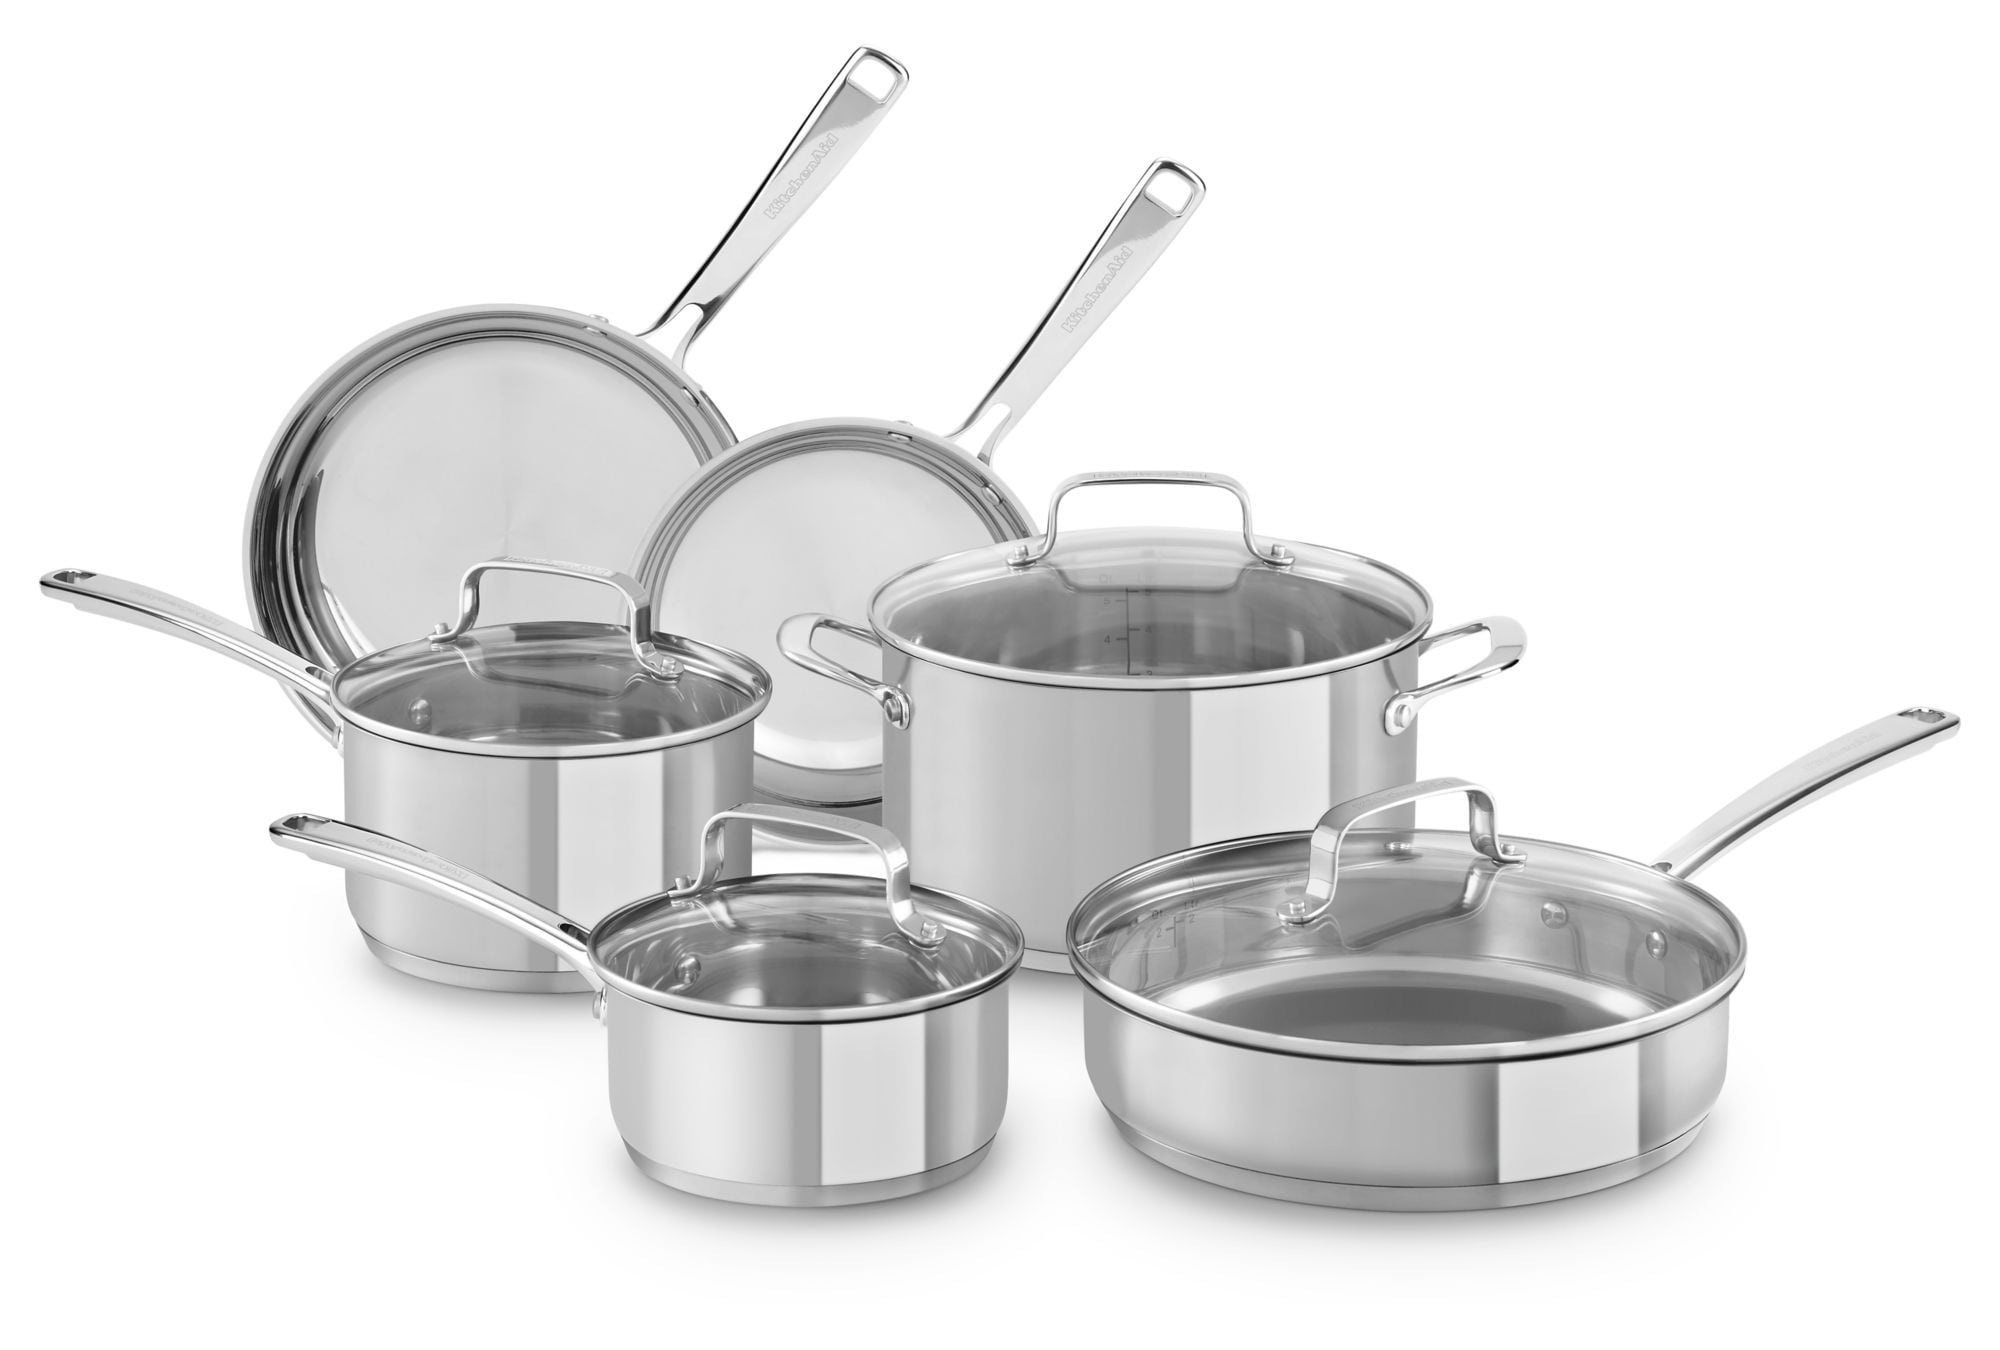 KitchenAid Stainless Steel 10 Piece Cookware Set Unboxing 